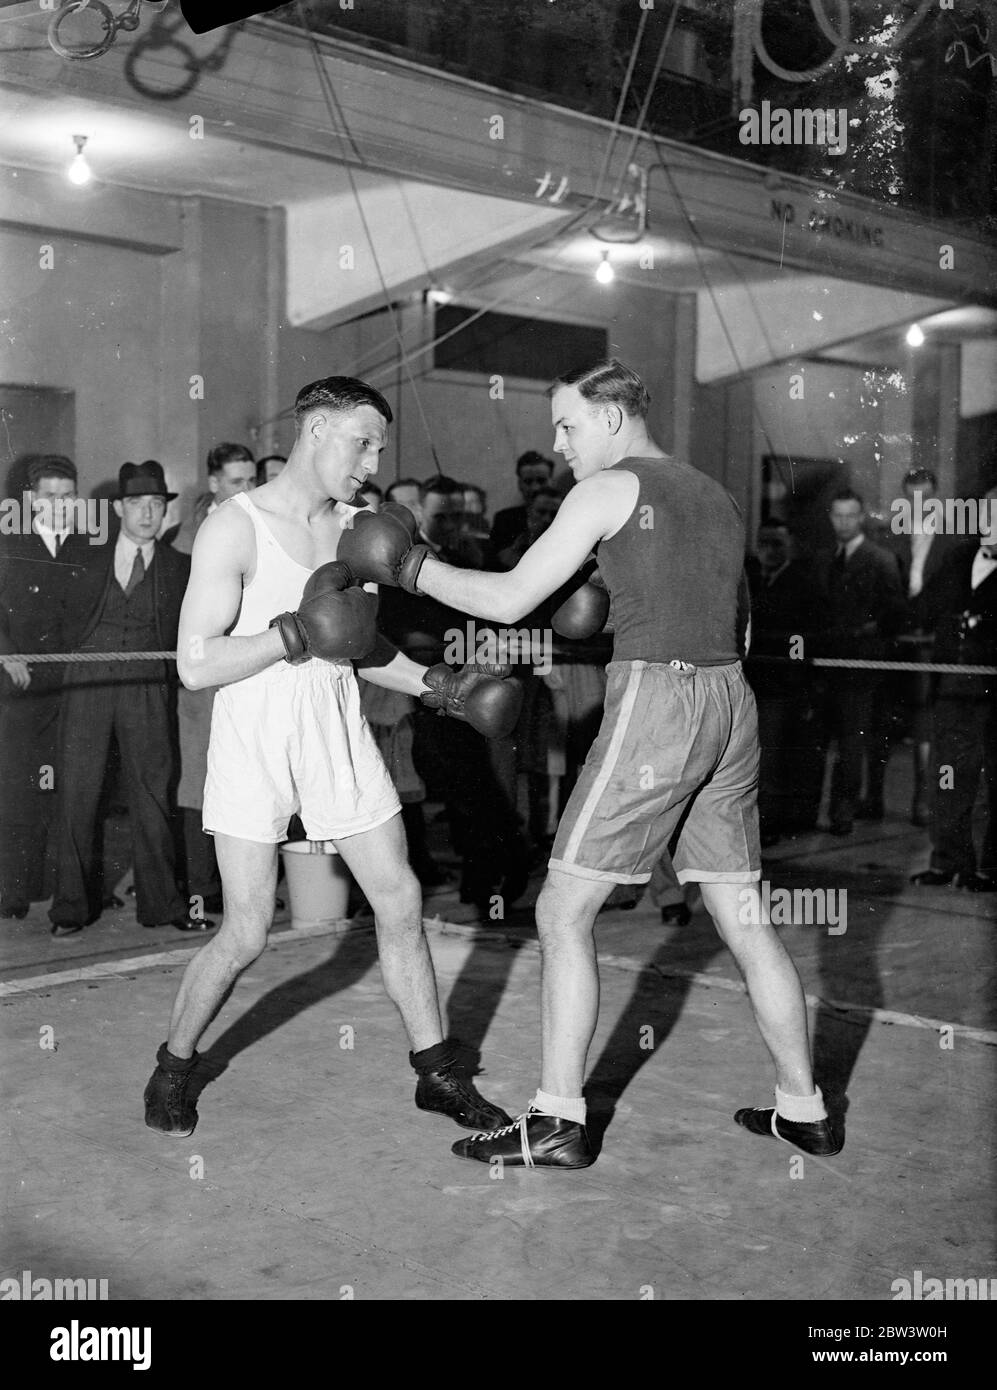 British amateur boxing champions train for ' Golden Gloves Tournament ' .  The Amateur boxing champions who are to compose the British team for the '  Golden Gloves ' tournament against the